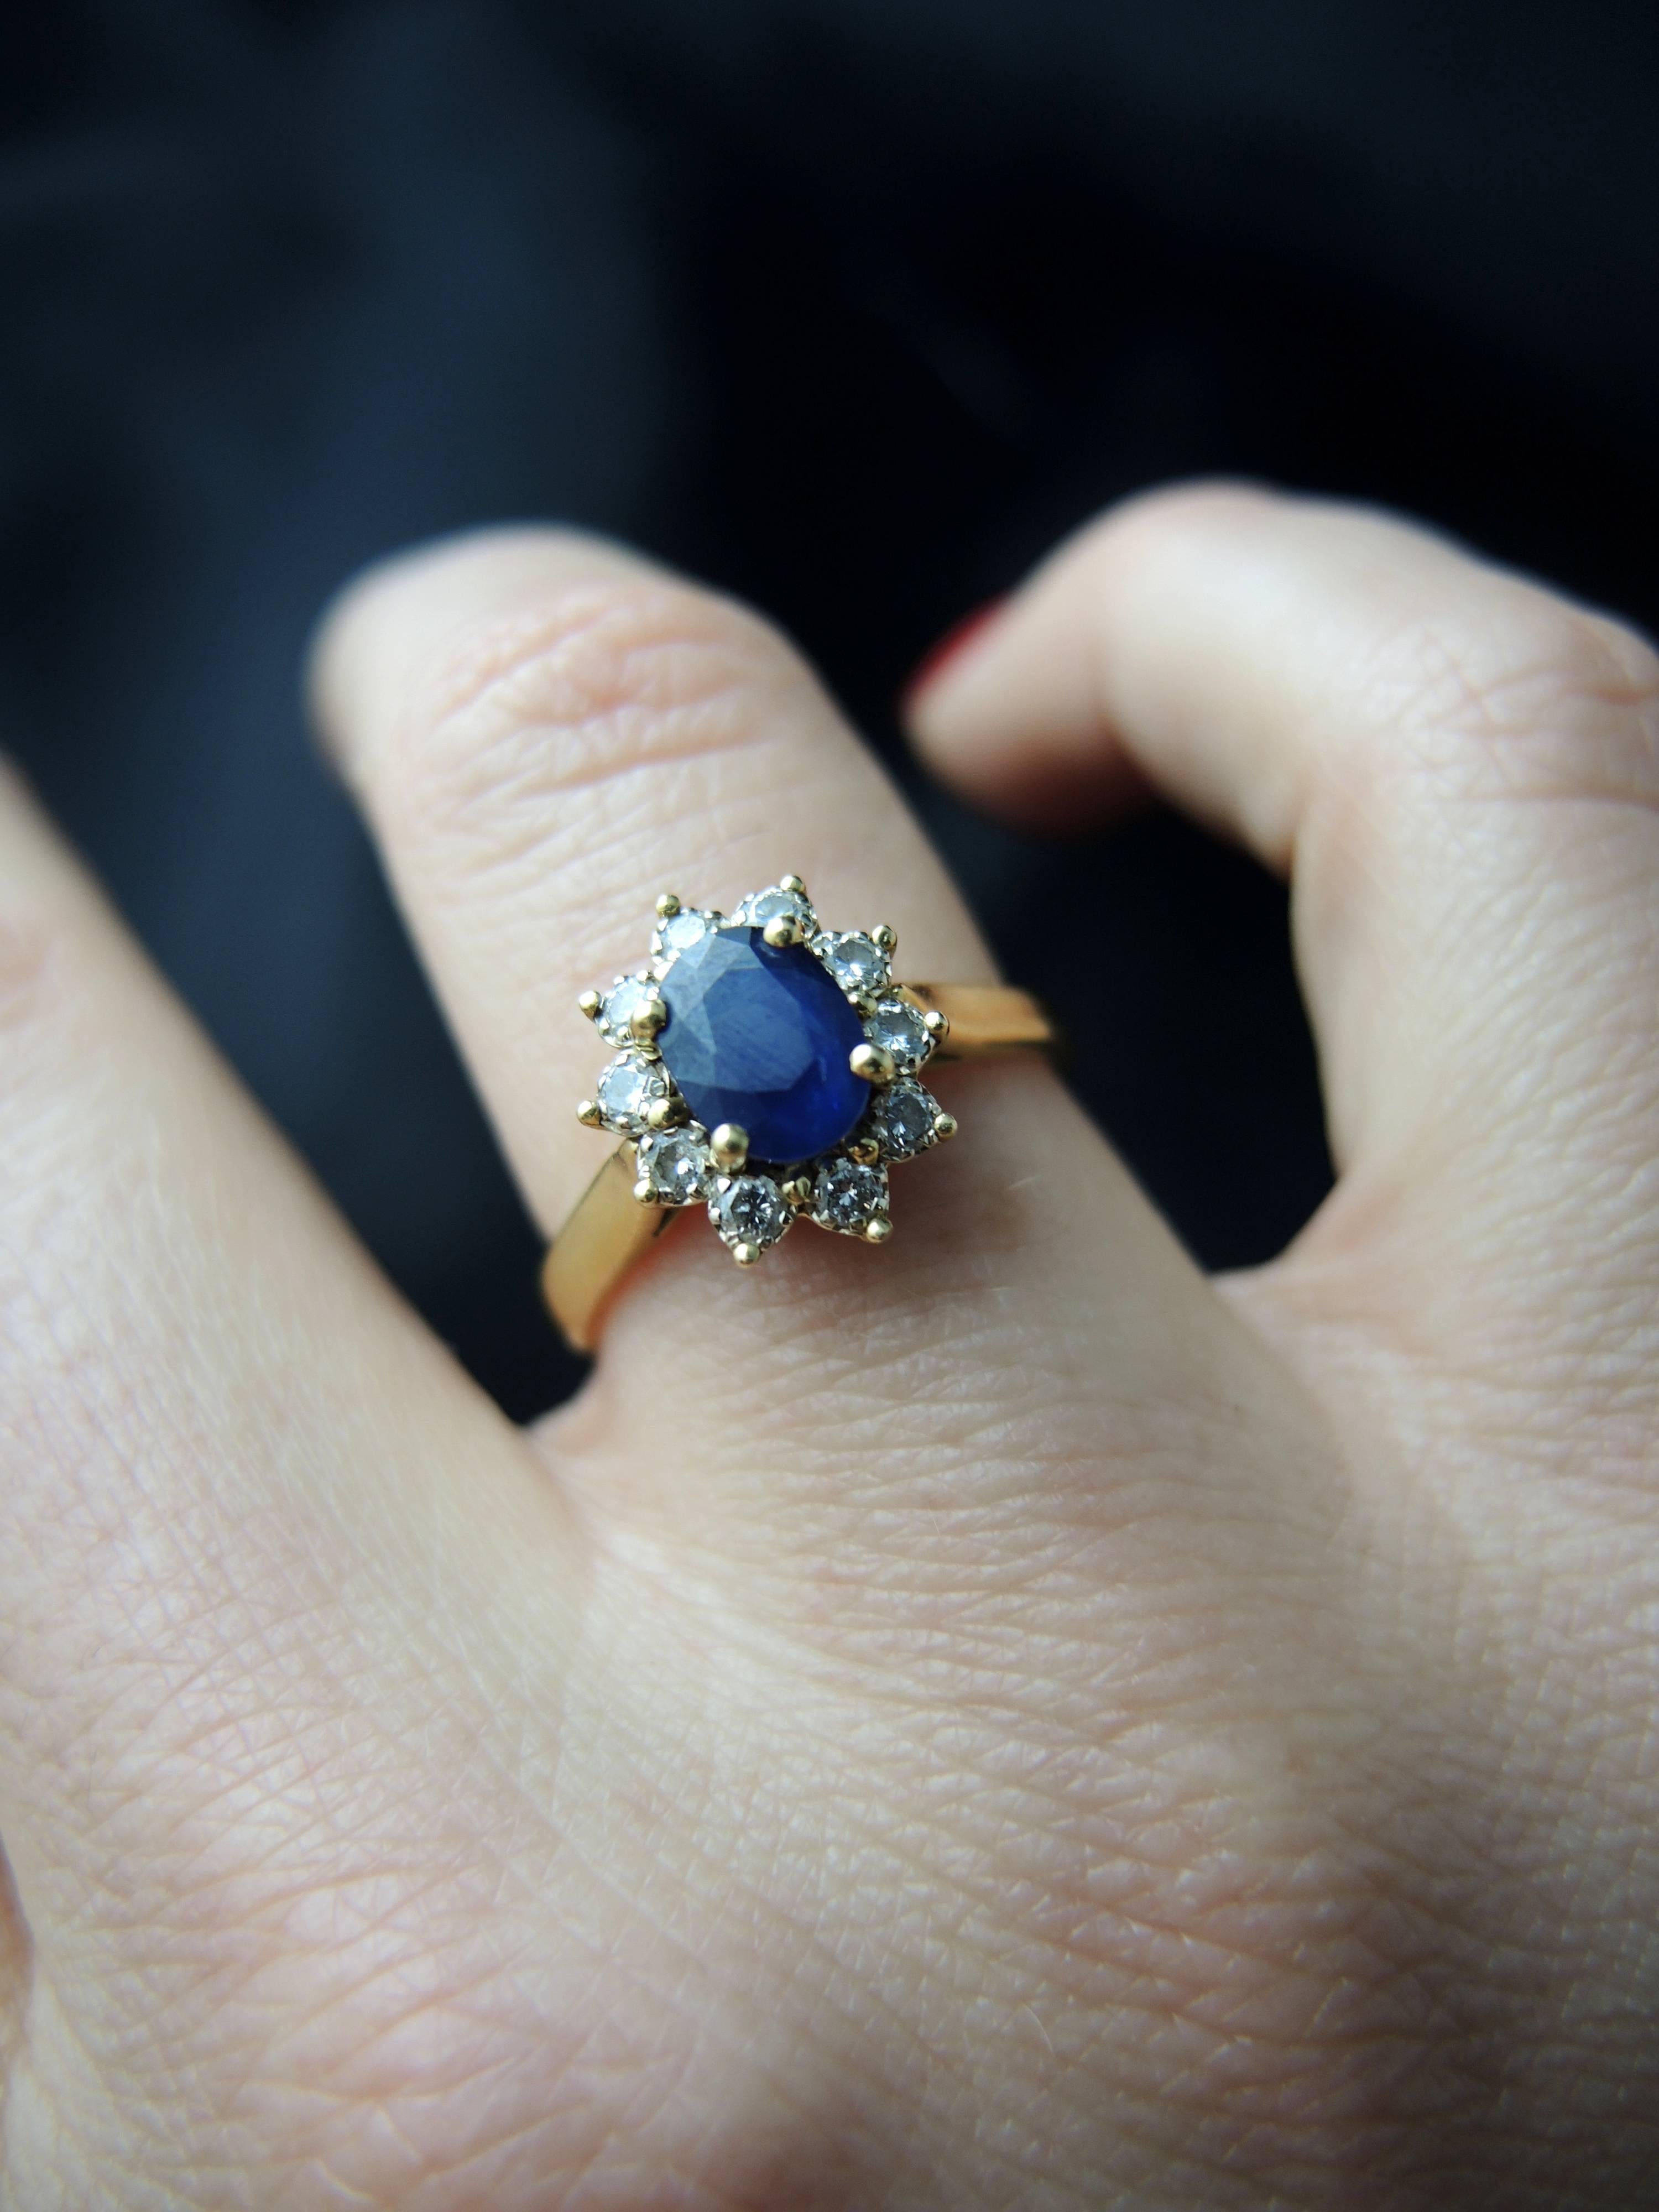 French Vintage Gold Cluster Ring with a Sapphire Surrounded by Diamonds 2